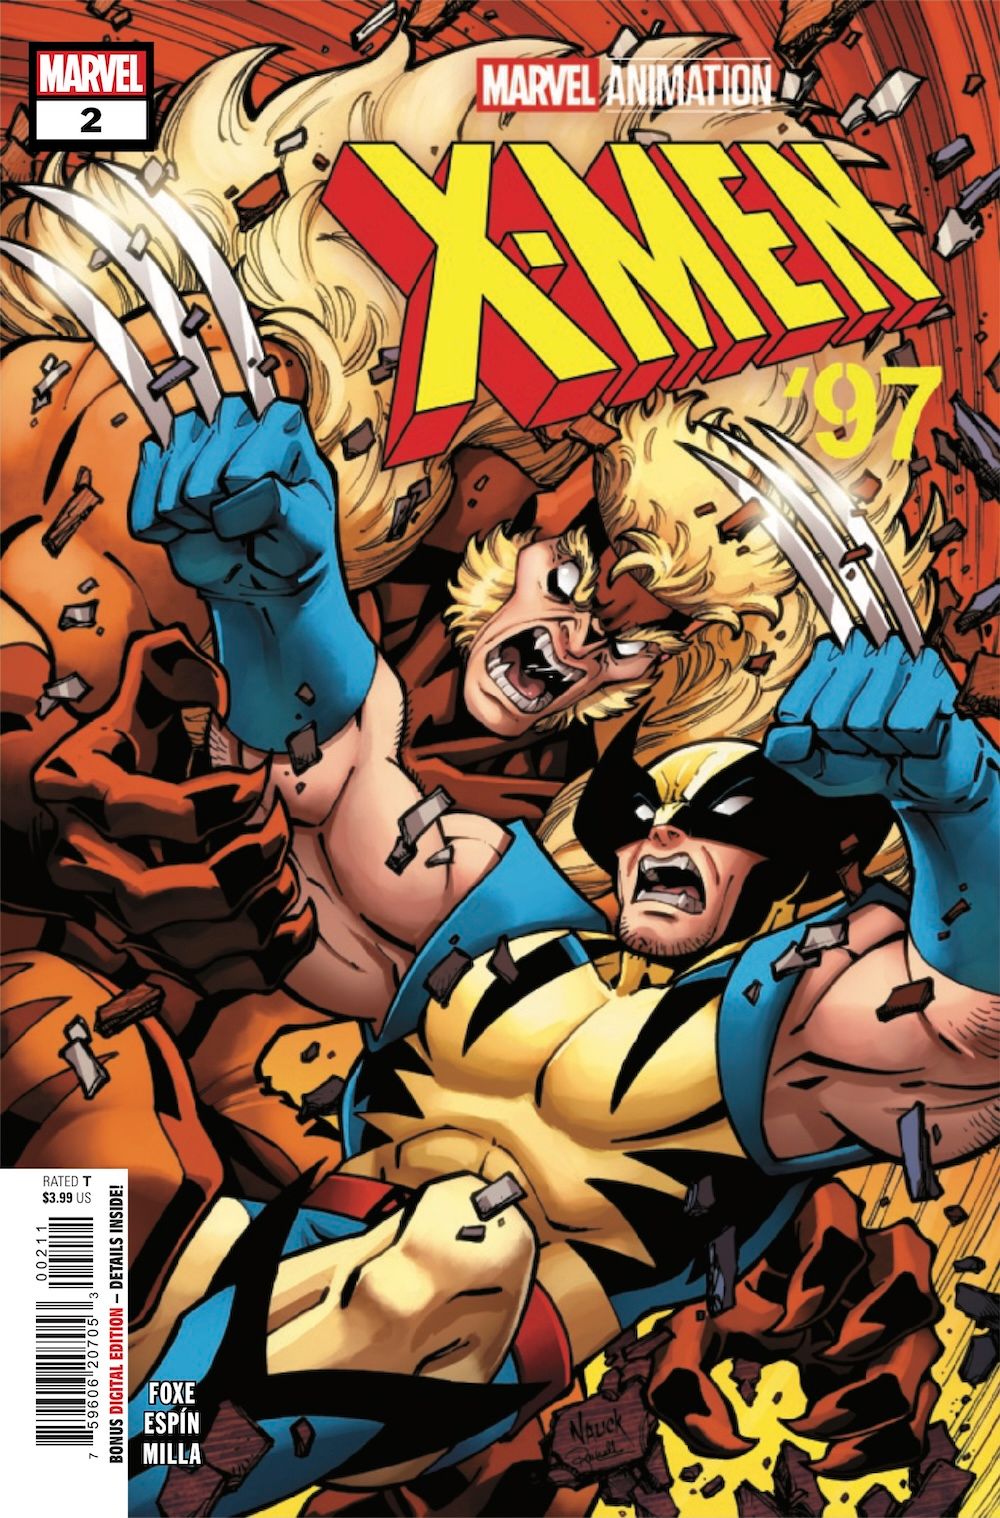 Wolverine and Sabretooth engage in close combat on the cover of Marvel Comics' X-Men '97 #2